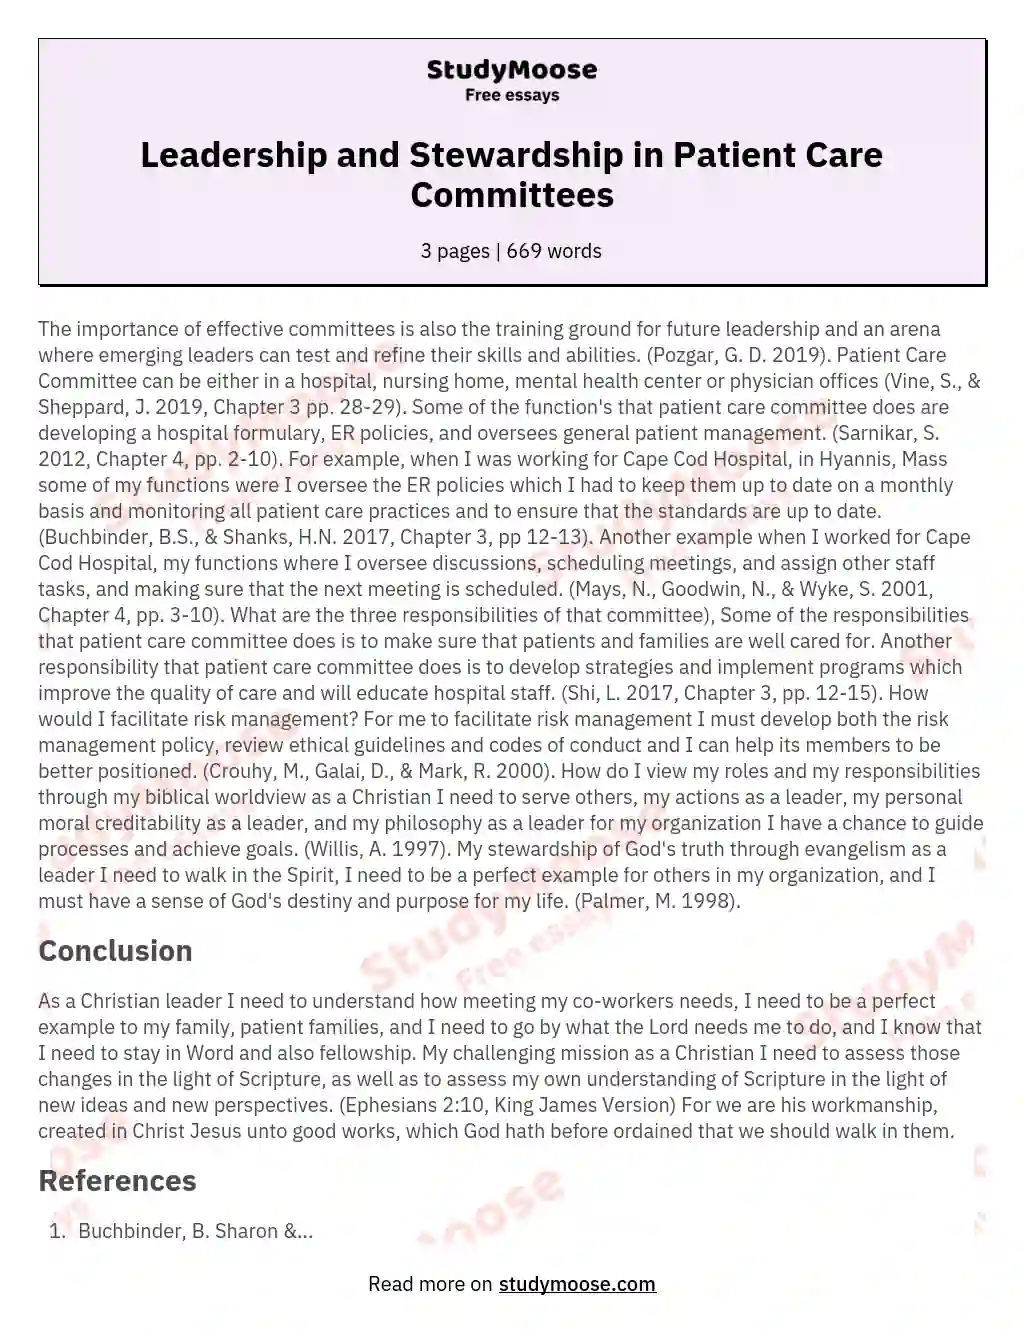 Leadership and Stewardship in Patient Care Committees essay